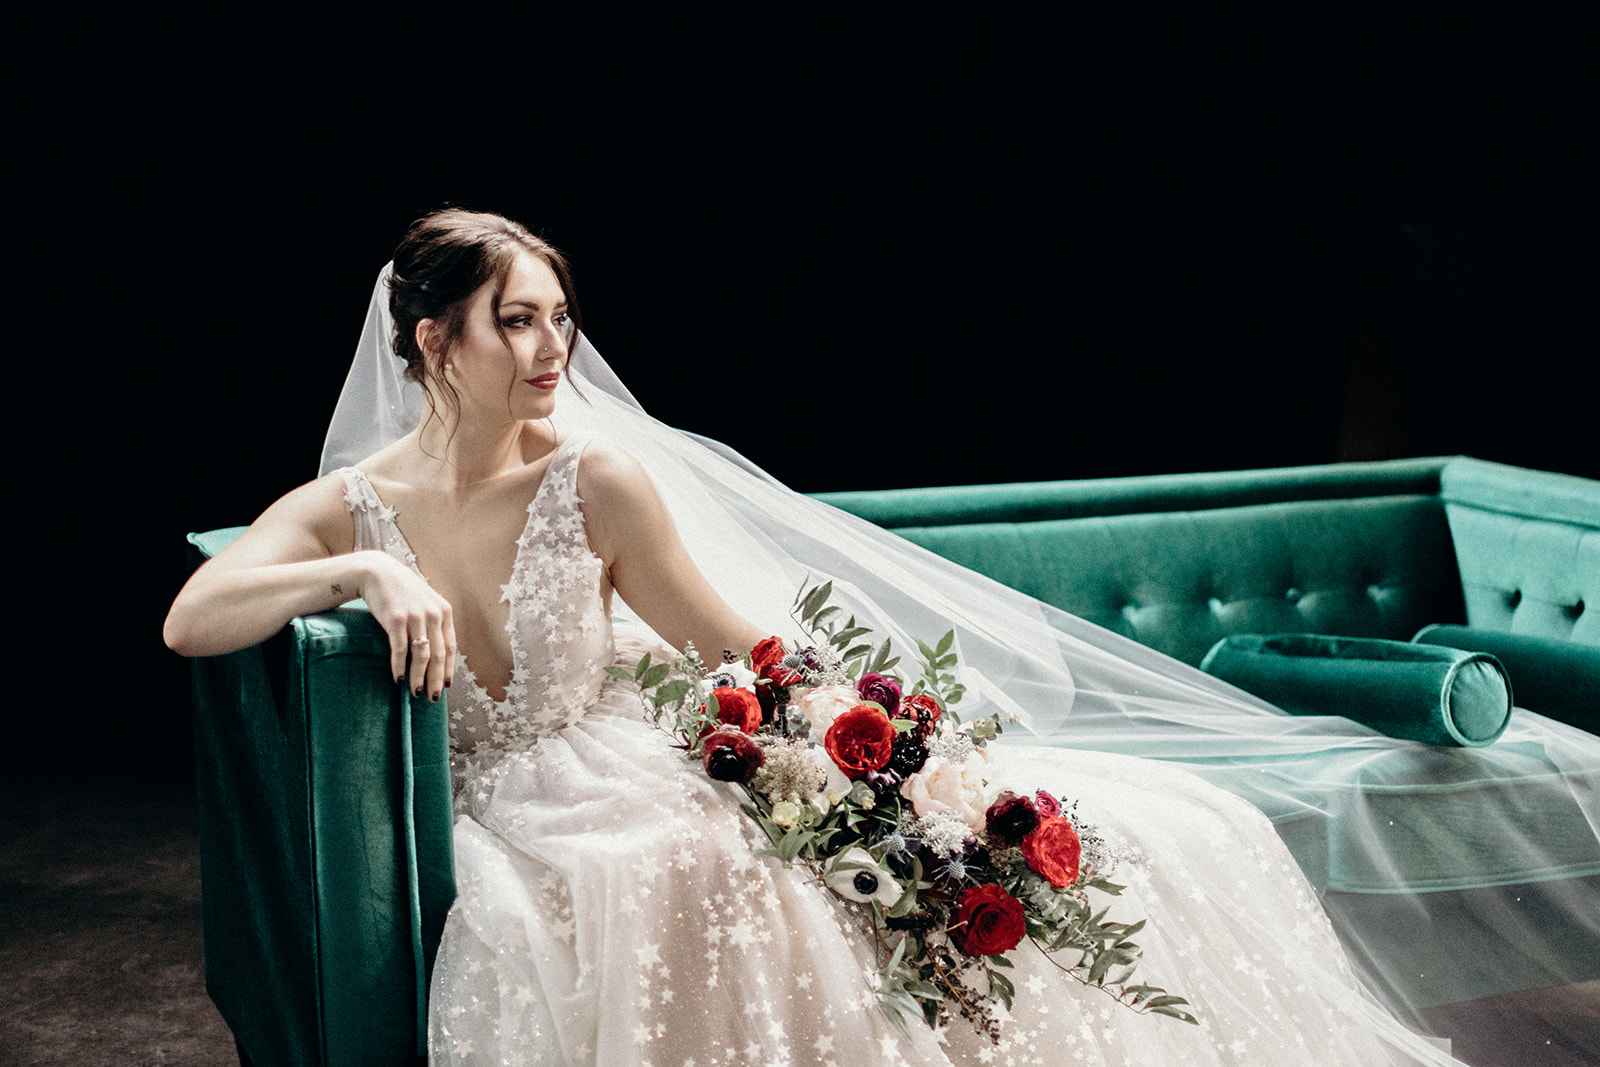 Starry wedding dress with an untamed, airy bridal bouquet with garden roses, ranunculus, and anemones in hues of burgundy and jewel tones. Bonus: green velvet couch! Wedding Floral Designer in Nashville, TN.